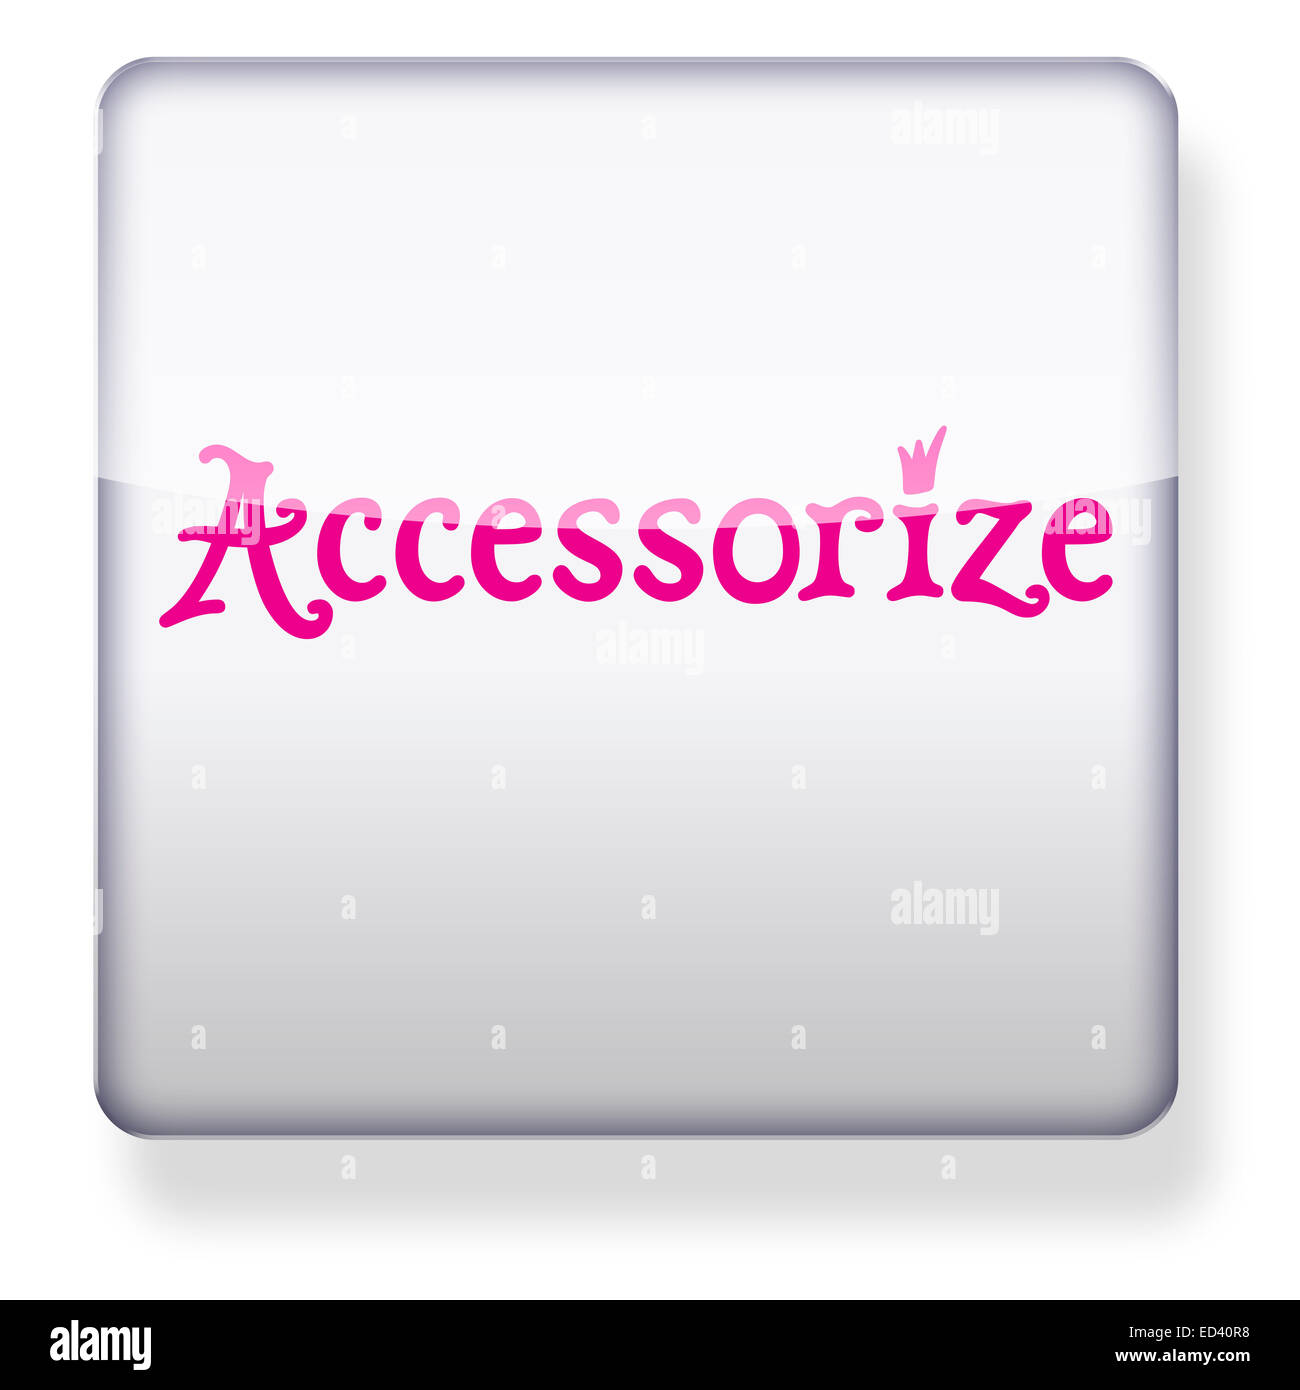 Accessorize logo as an app icon. Clipping path included. Stock Photo